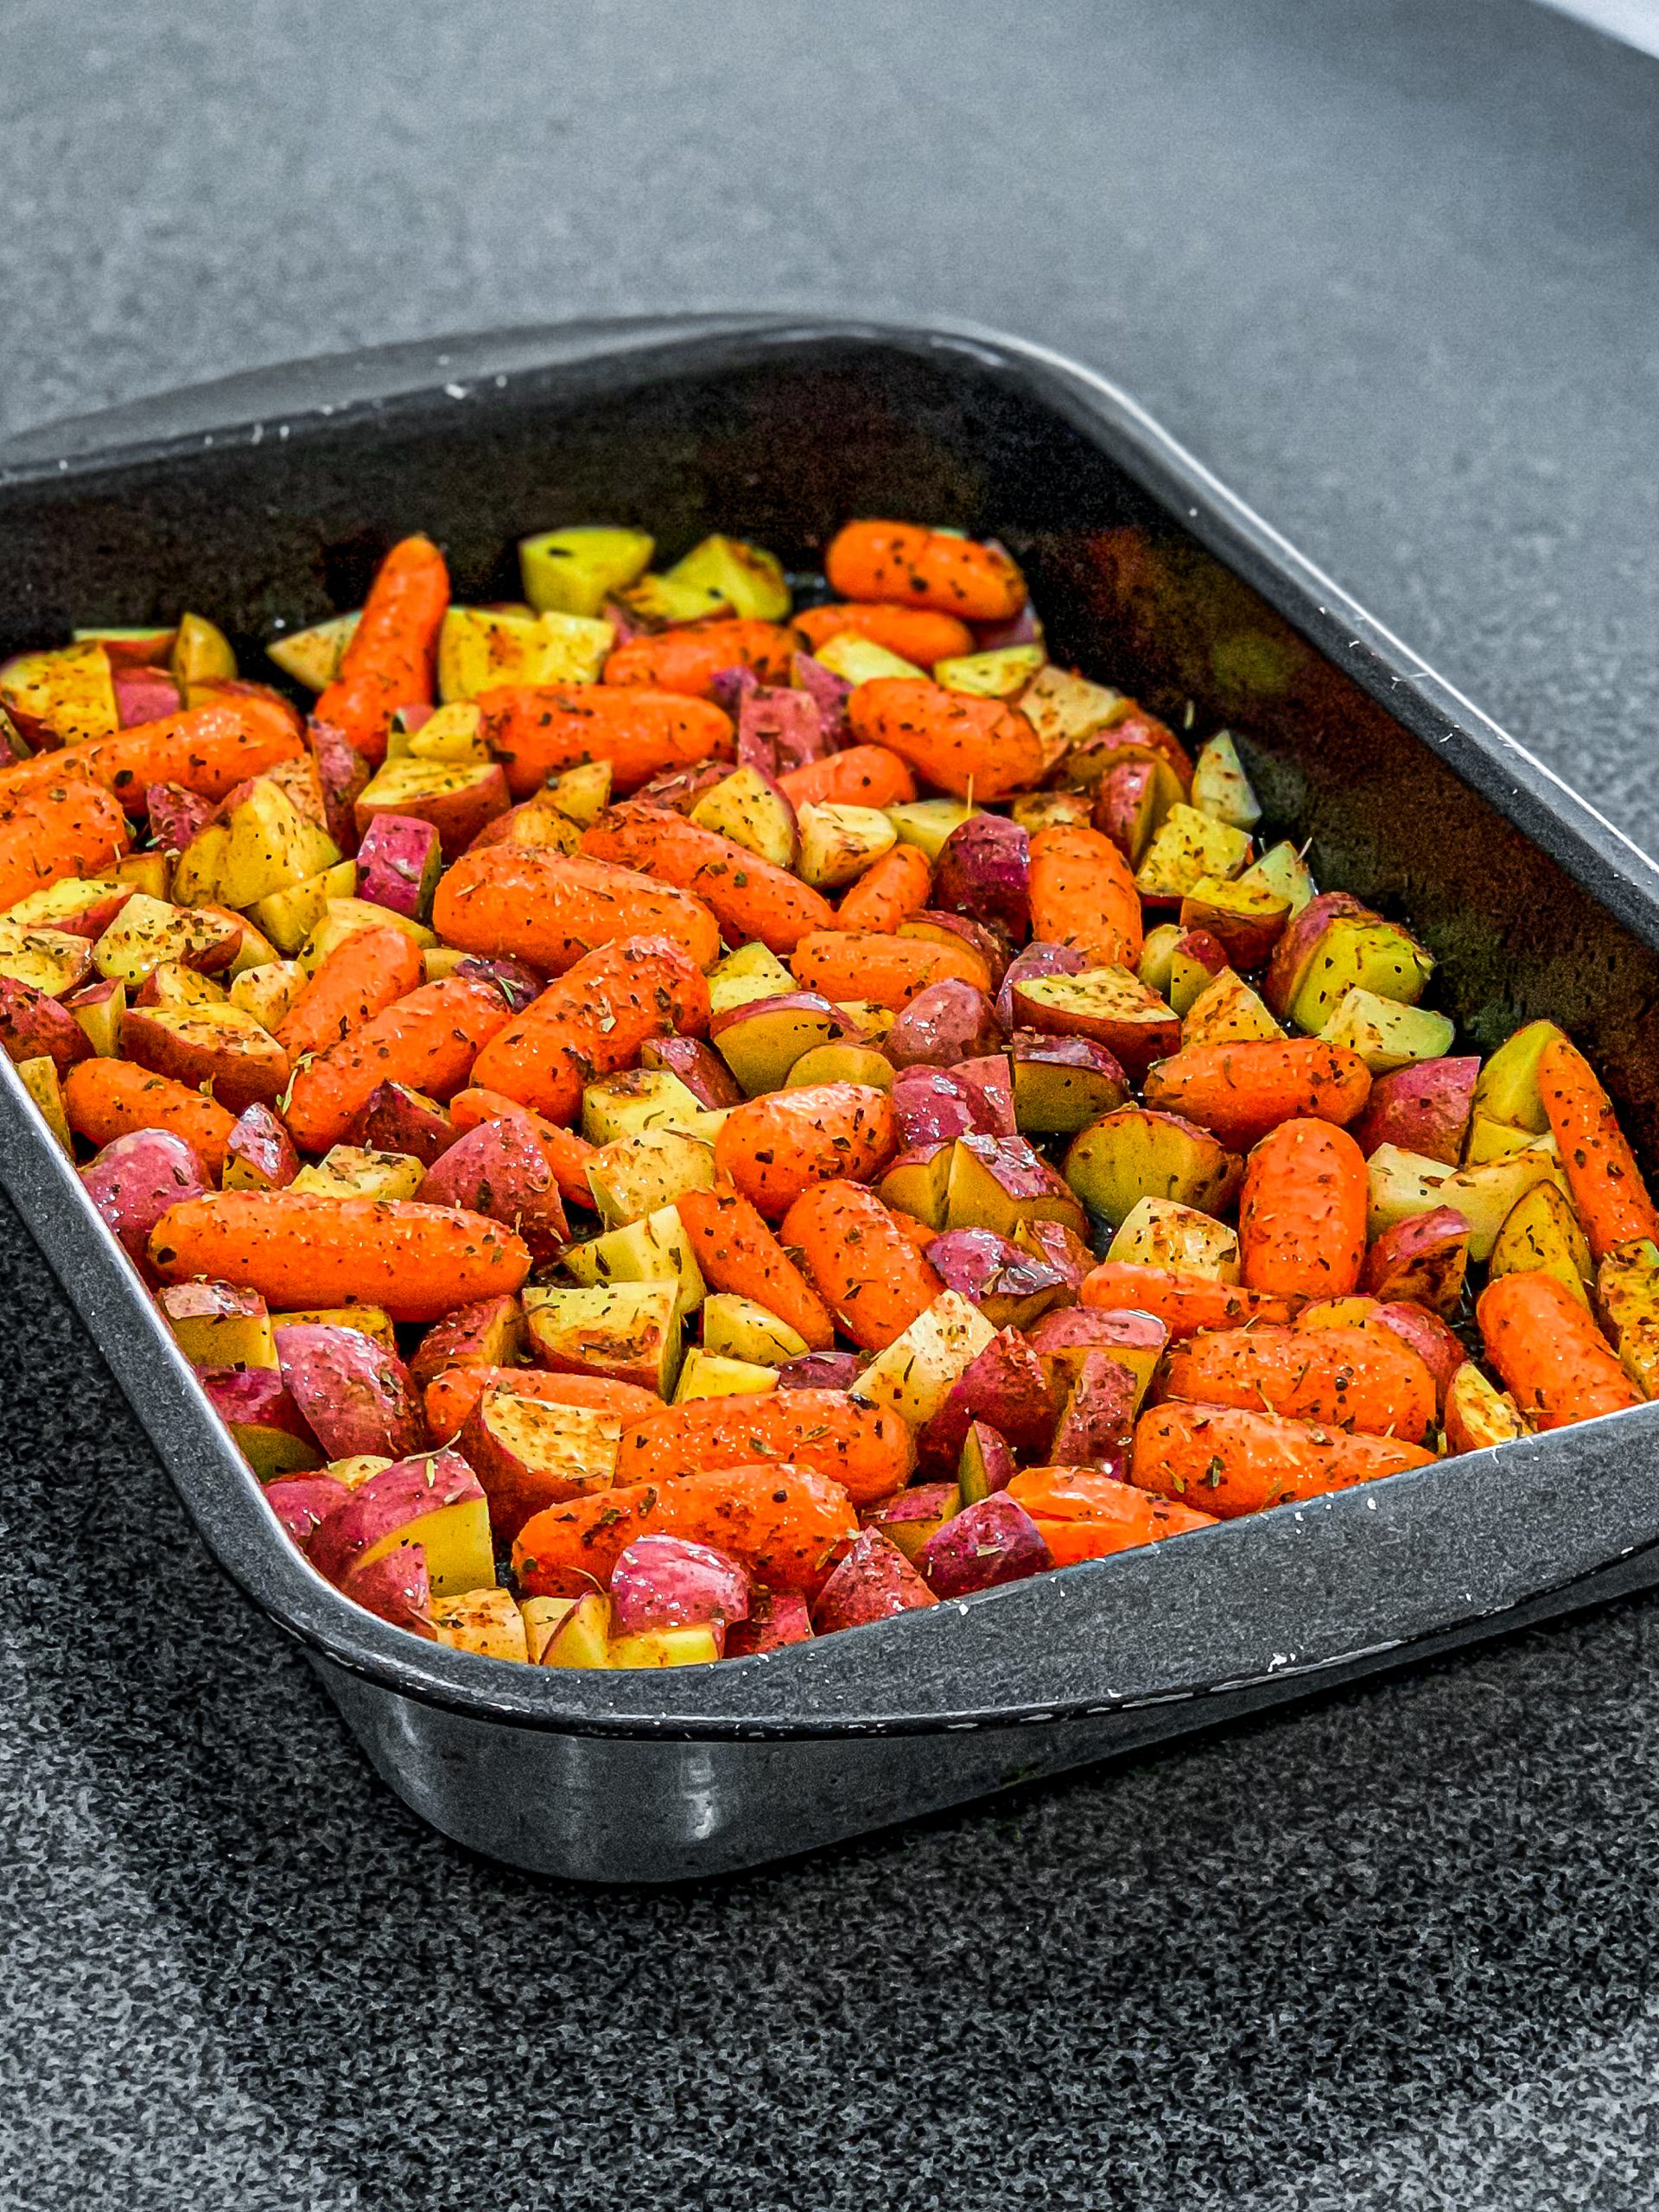 Sprinkle half of the mixed dry herbs over the top of the carrots and potatoes and toss until evenly coated.